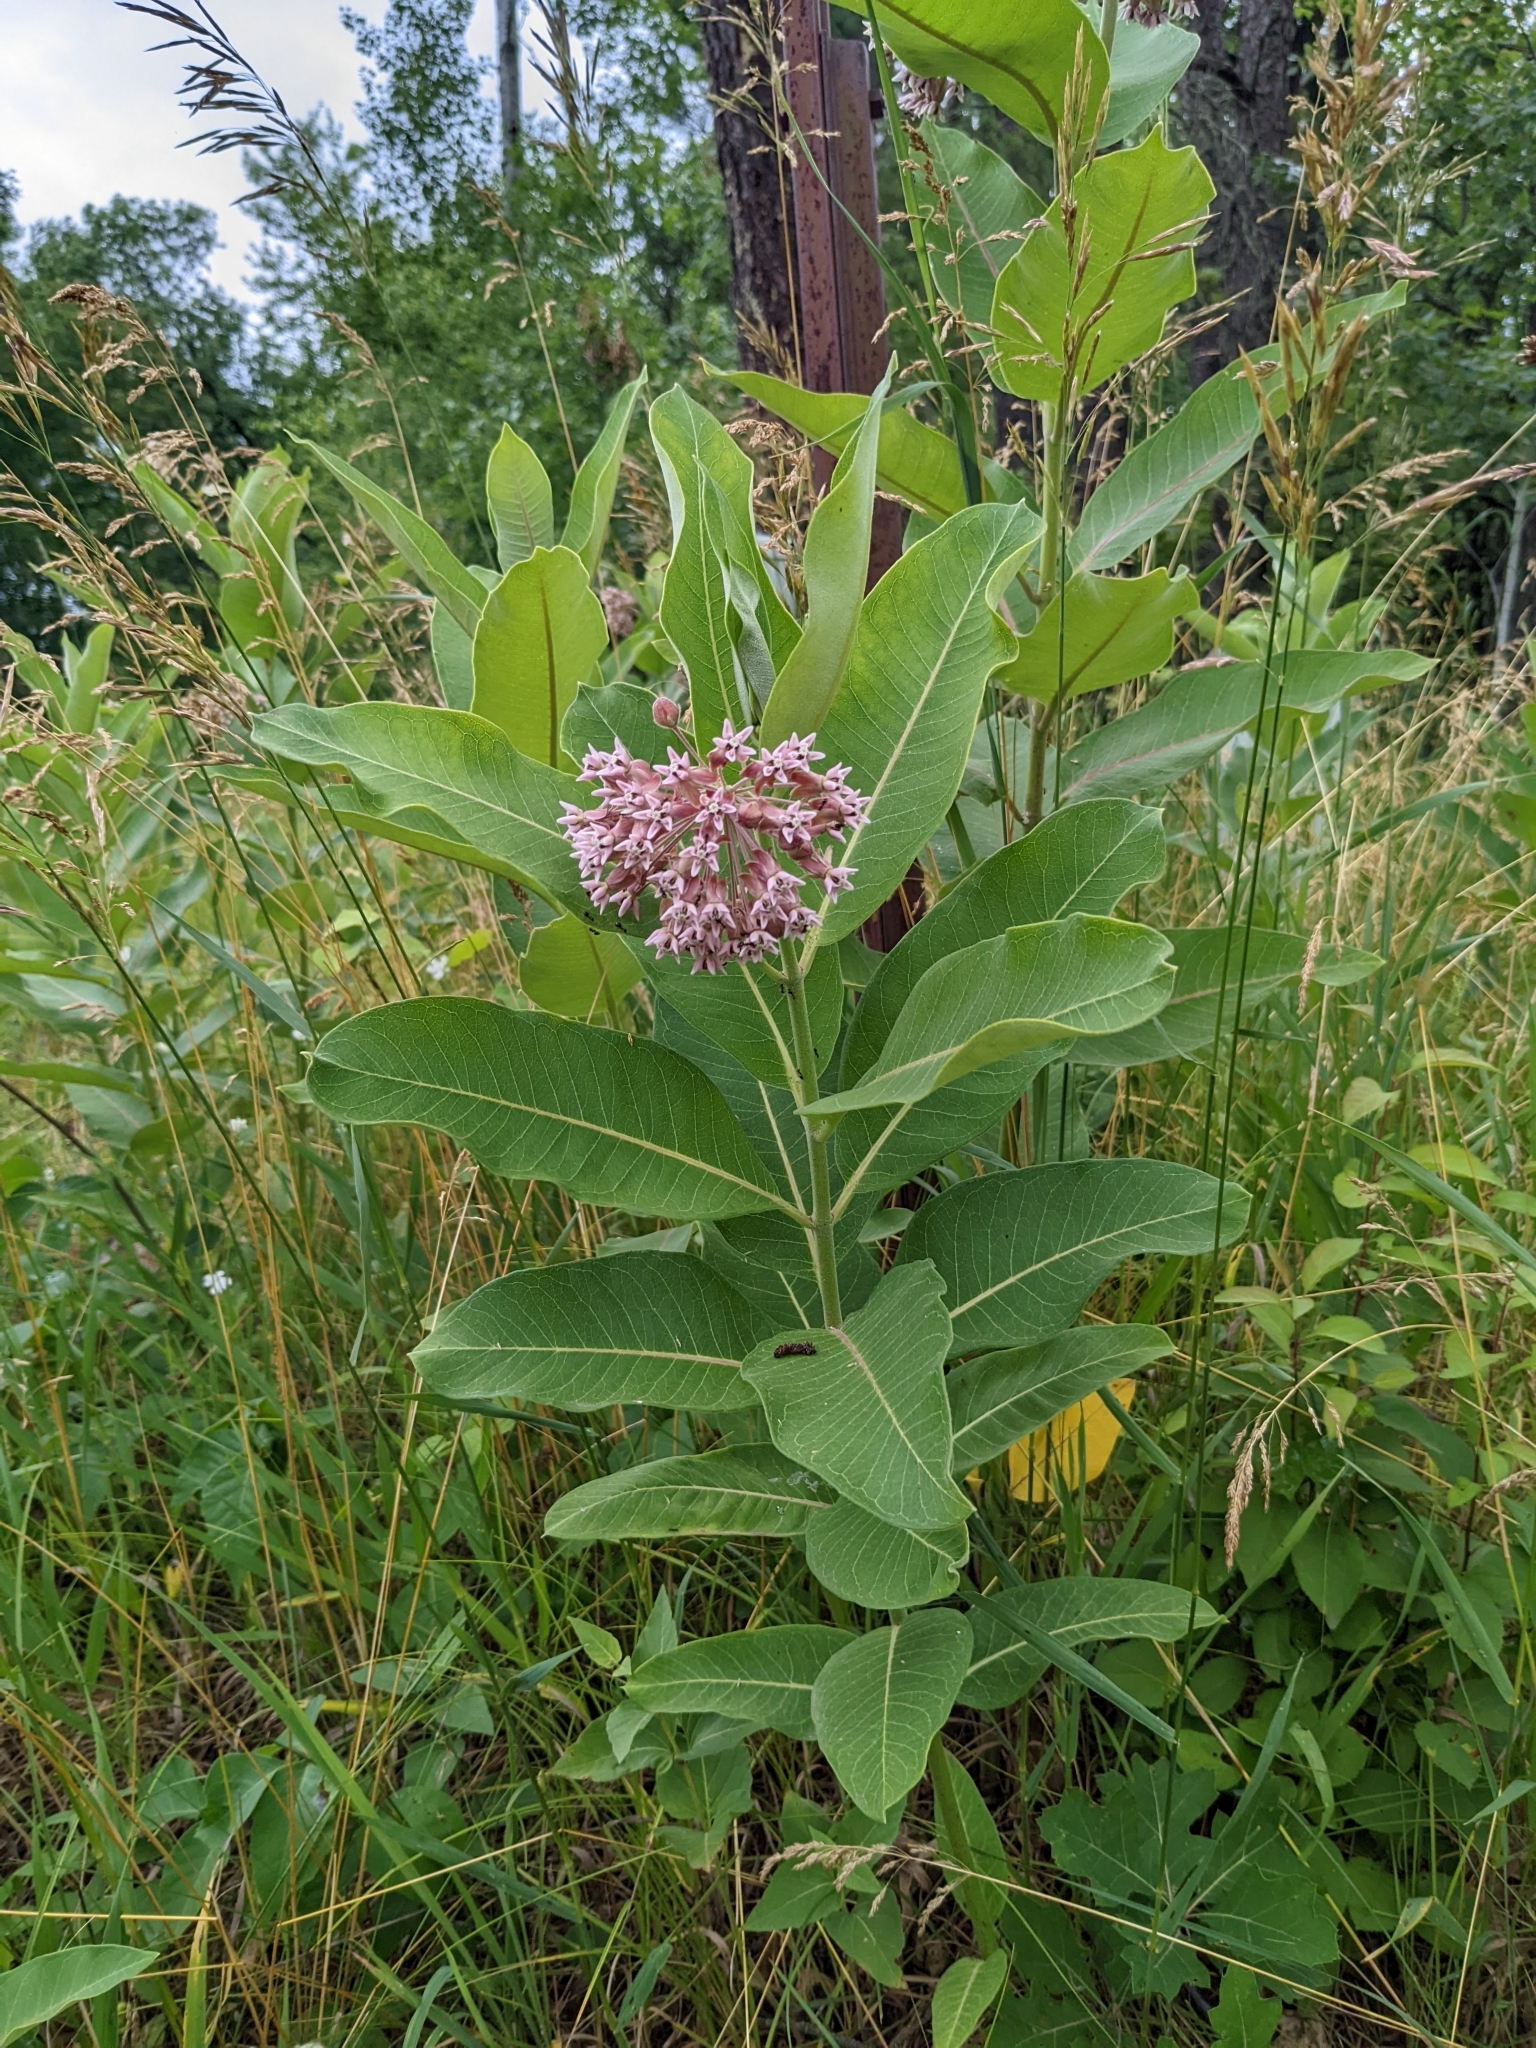 Common milkweed with pink flowers and large, stiff leaves